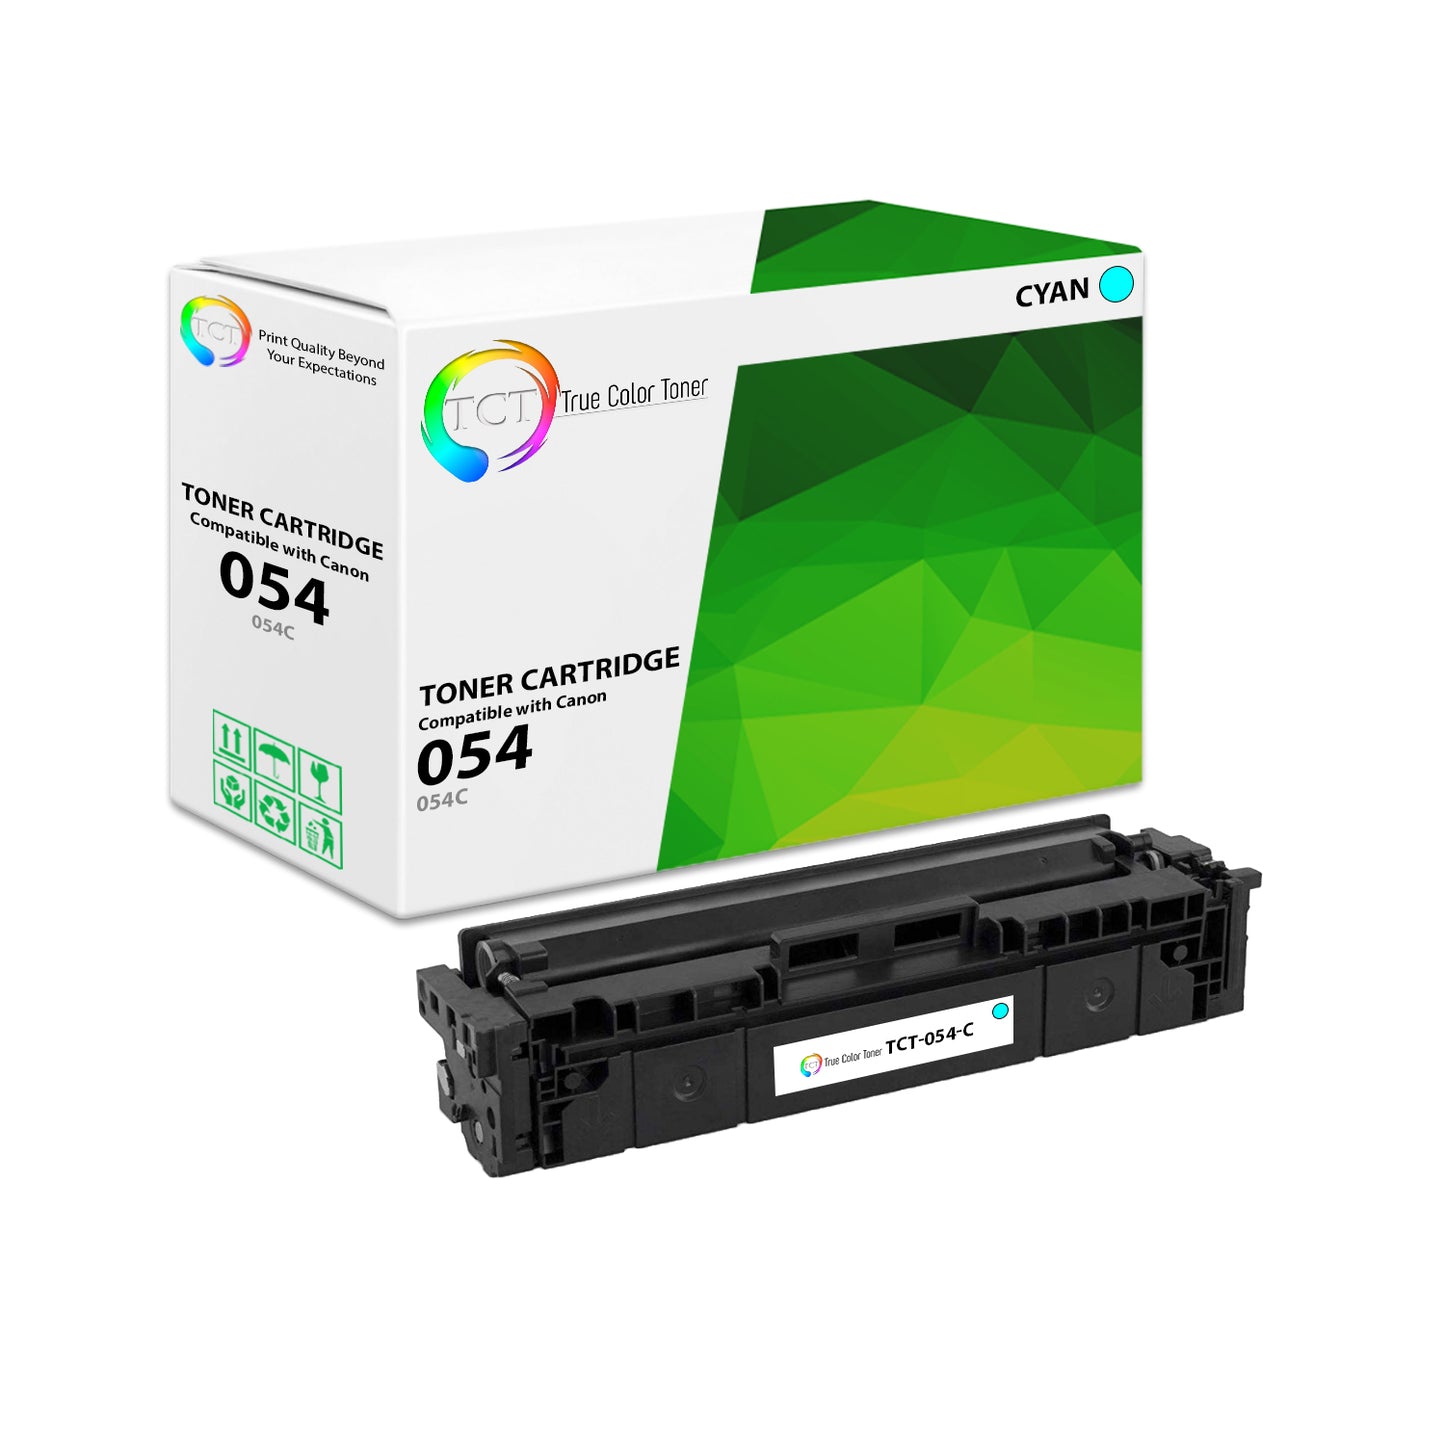 TCT Compatible Toner Cartridge Replacement for the Canon 054 Series - 1 Pack Cyan